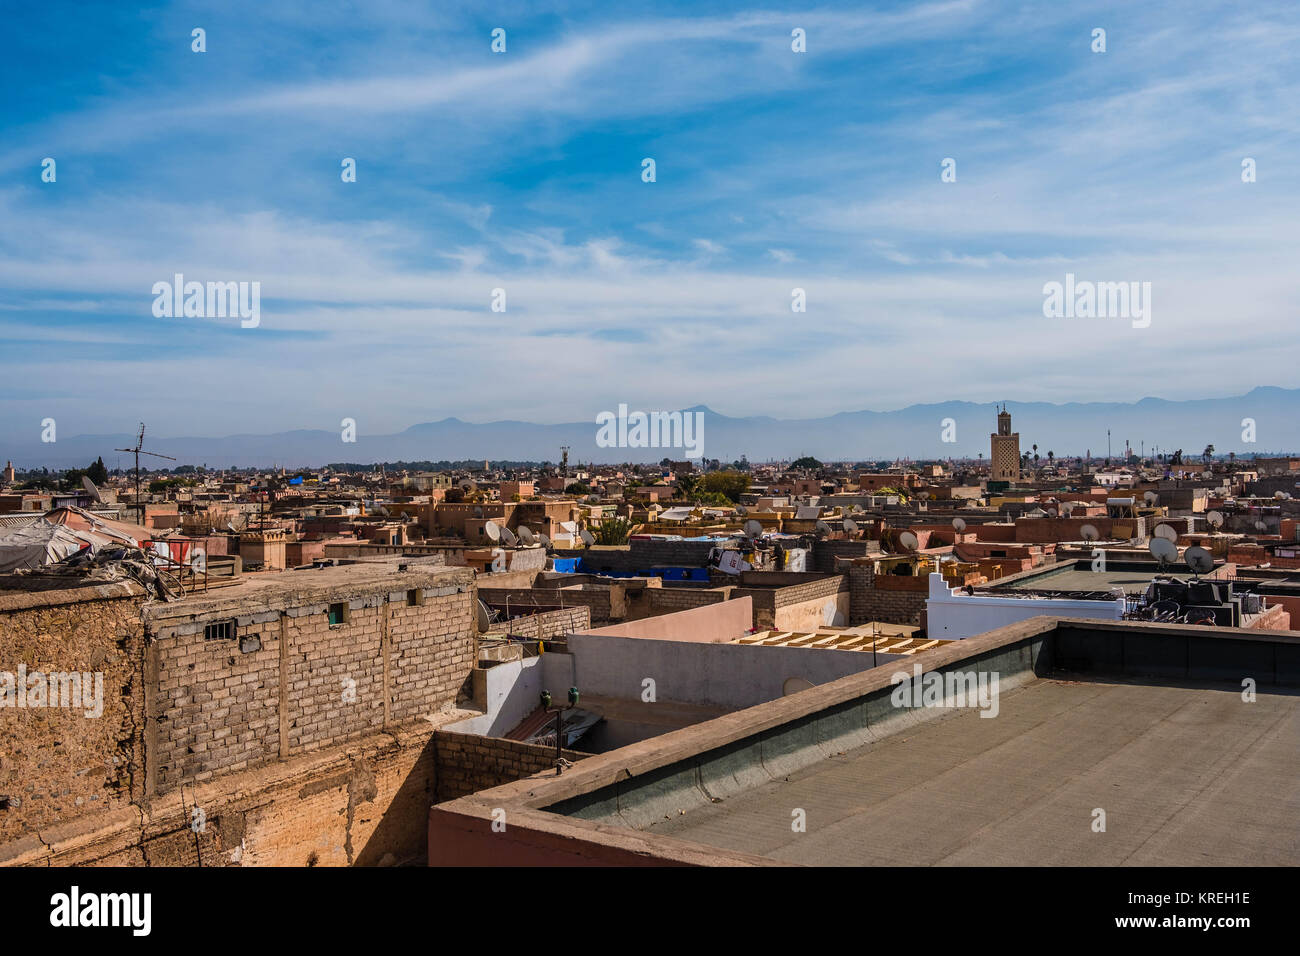 Skyline view of Marrakech with mountains on the background and classic Islamic City view Stock Photo